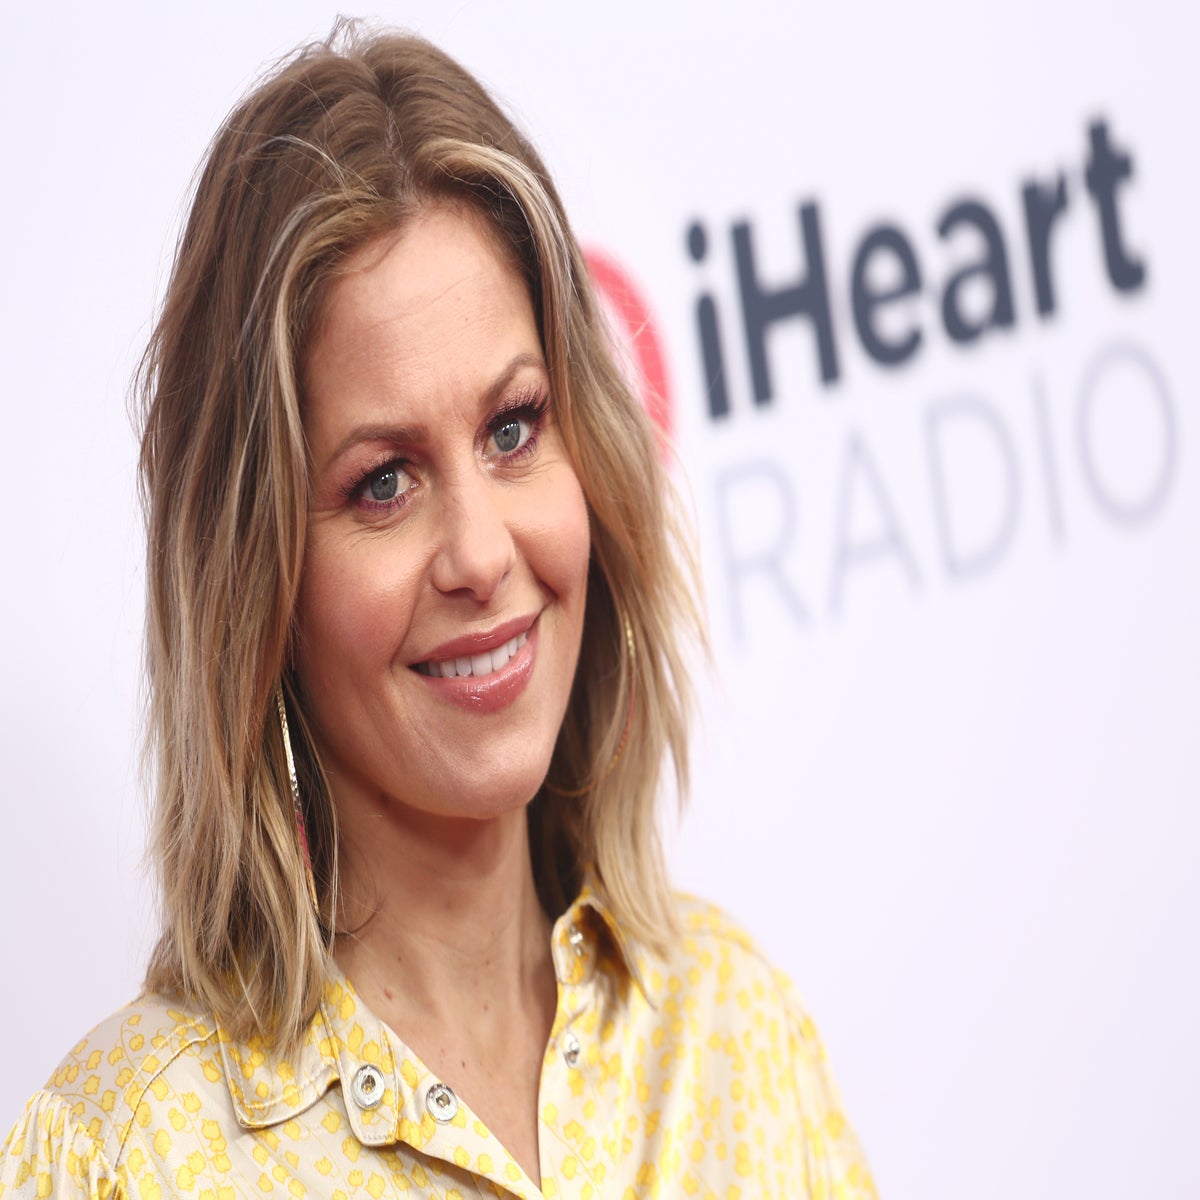 Candace Cameron Bure Responds to Backlash Over Marriage Comments